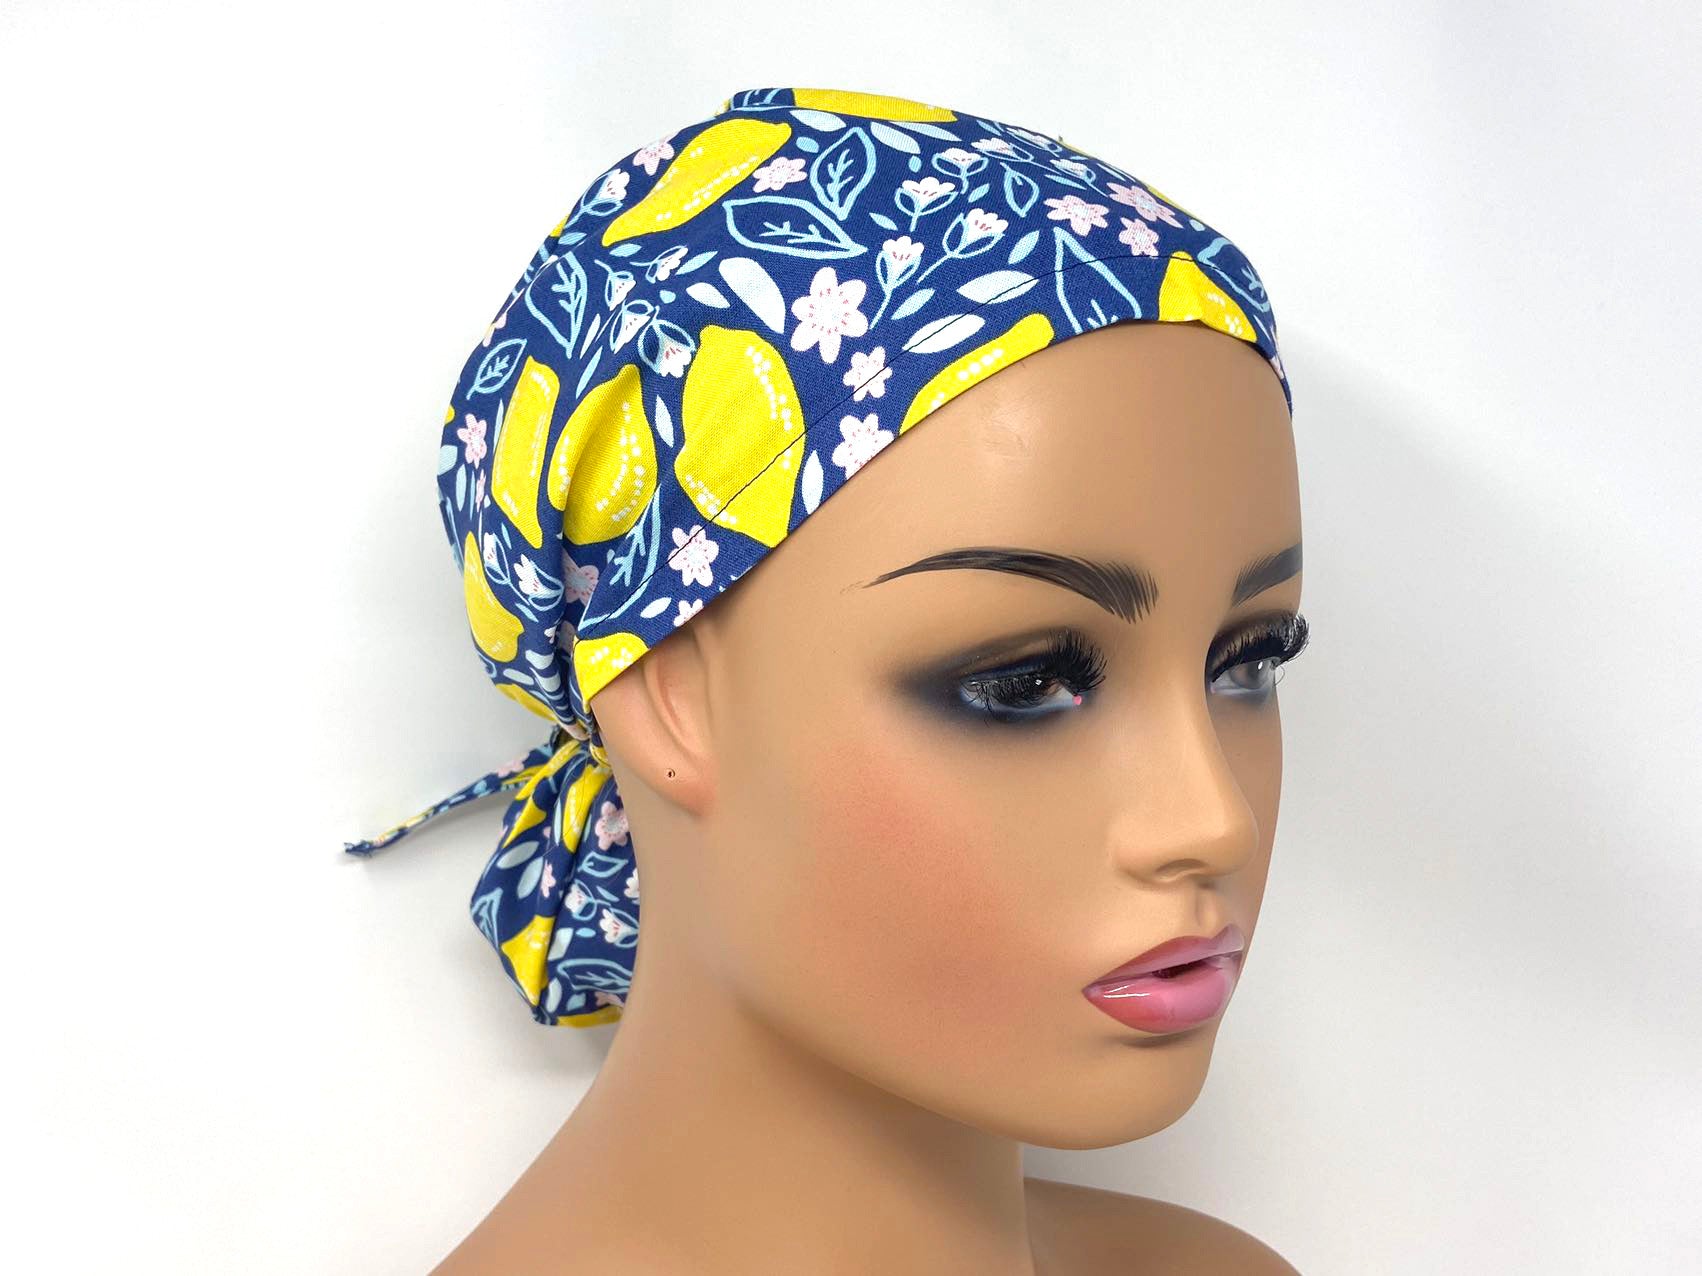 Lemon and Pink Flowers on Blue - Ponytail